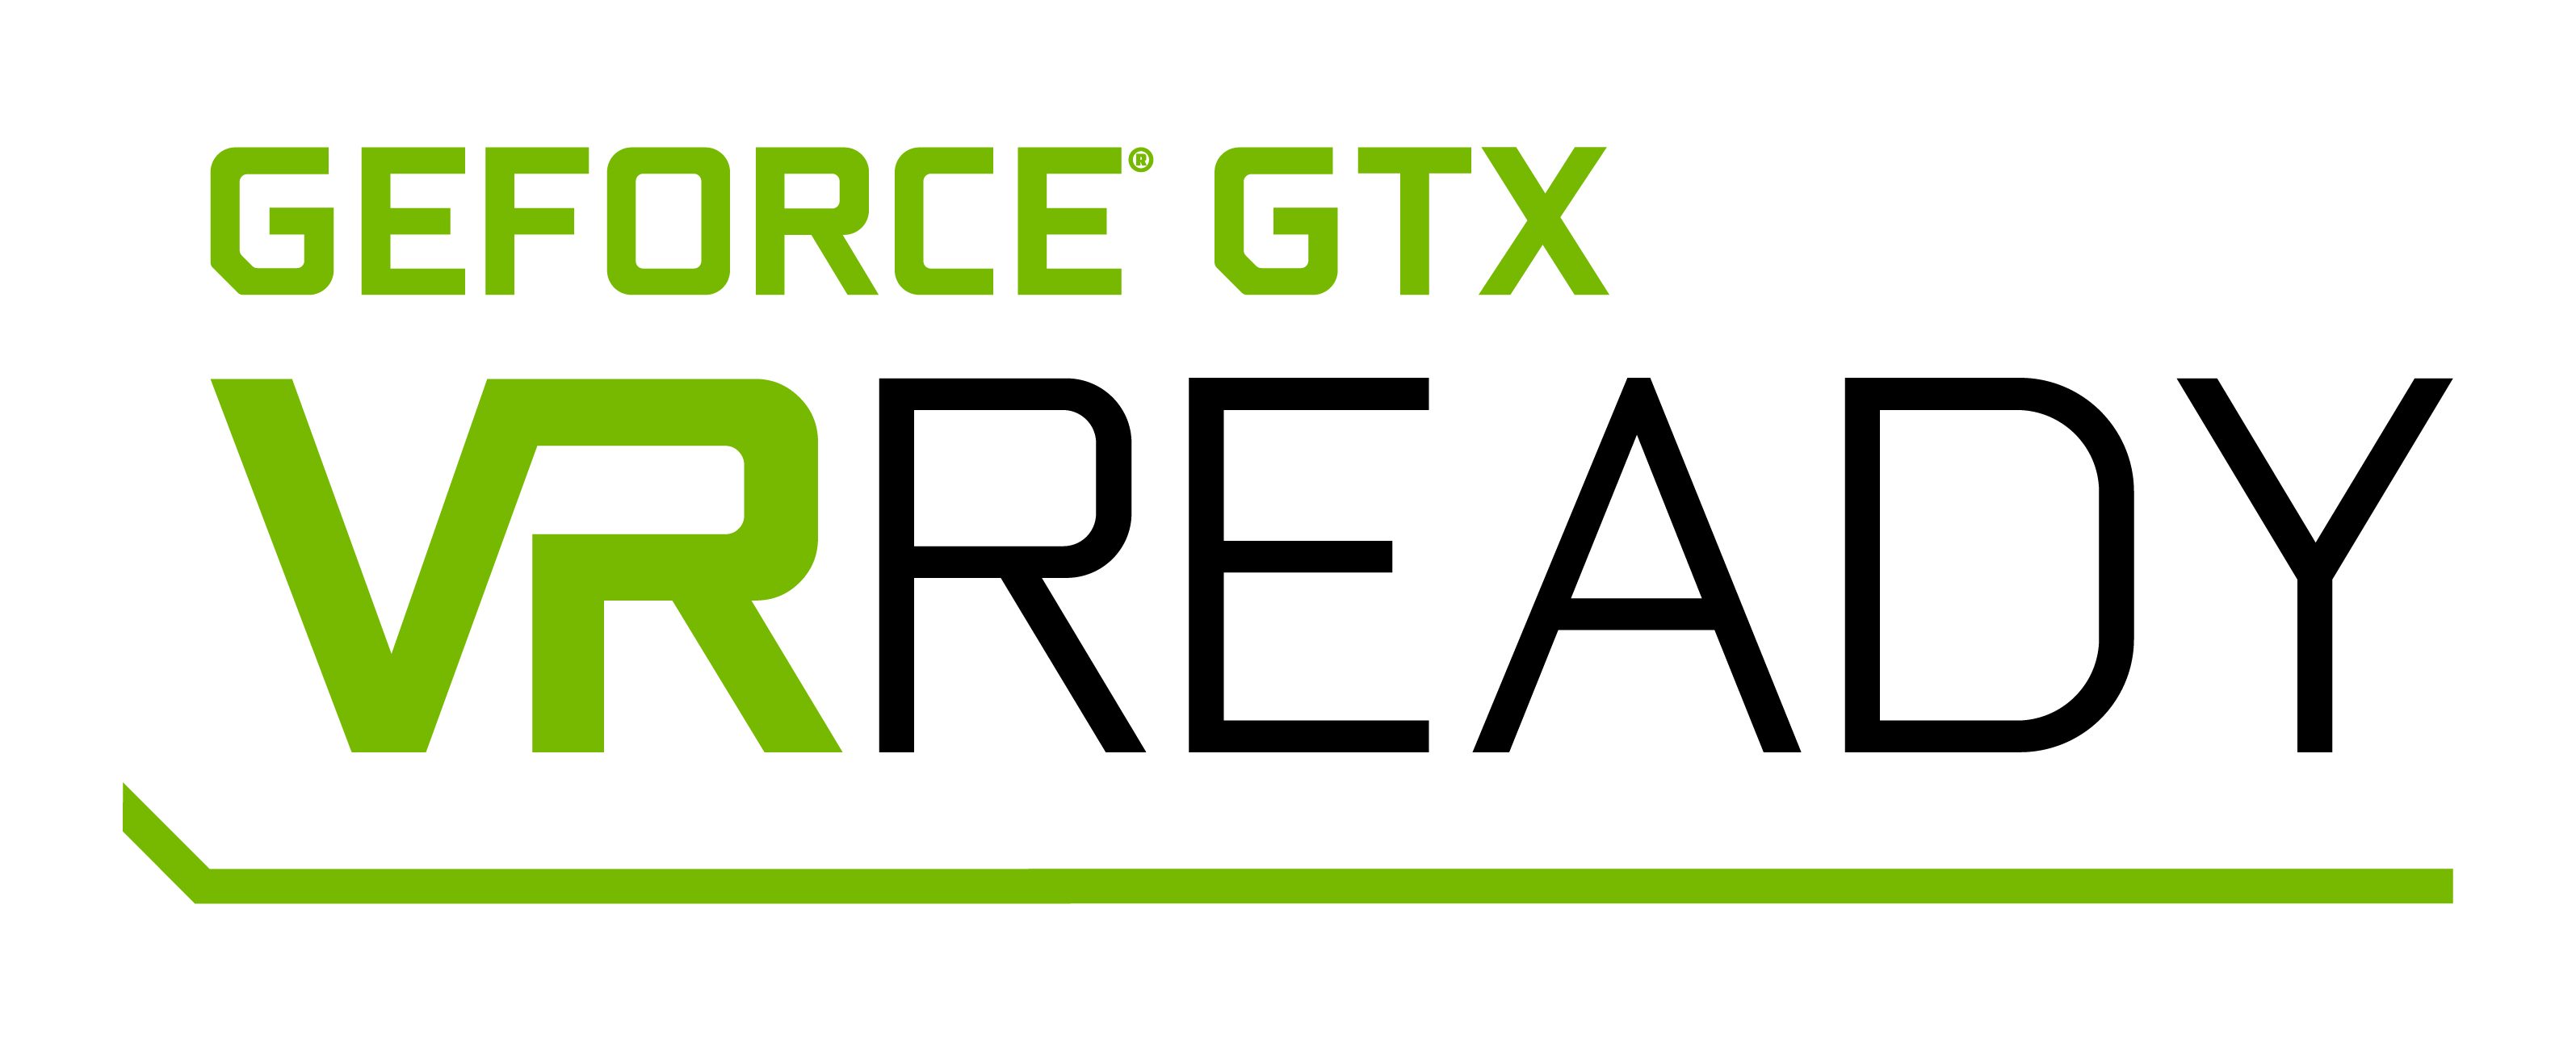 Launches 'GTX VR Ready' PC Program Road to VR